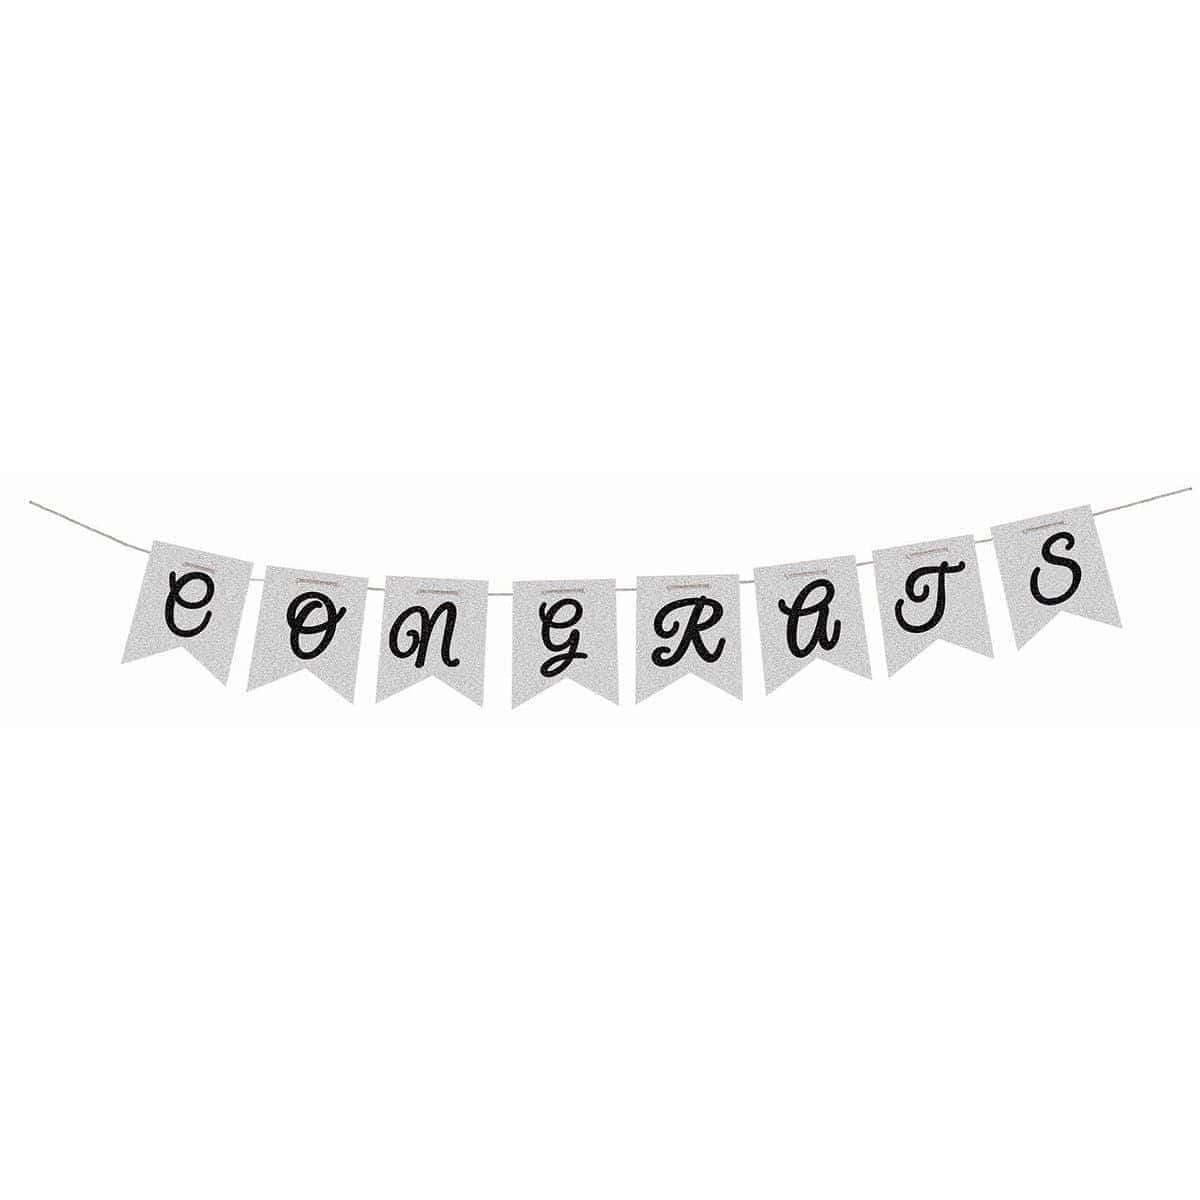 Buy Decorations Glitter Banner 7 In. - Congratz sold at Party Expert